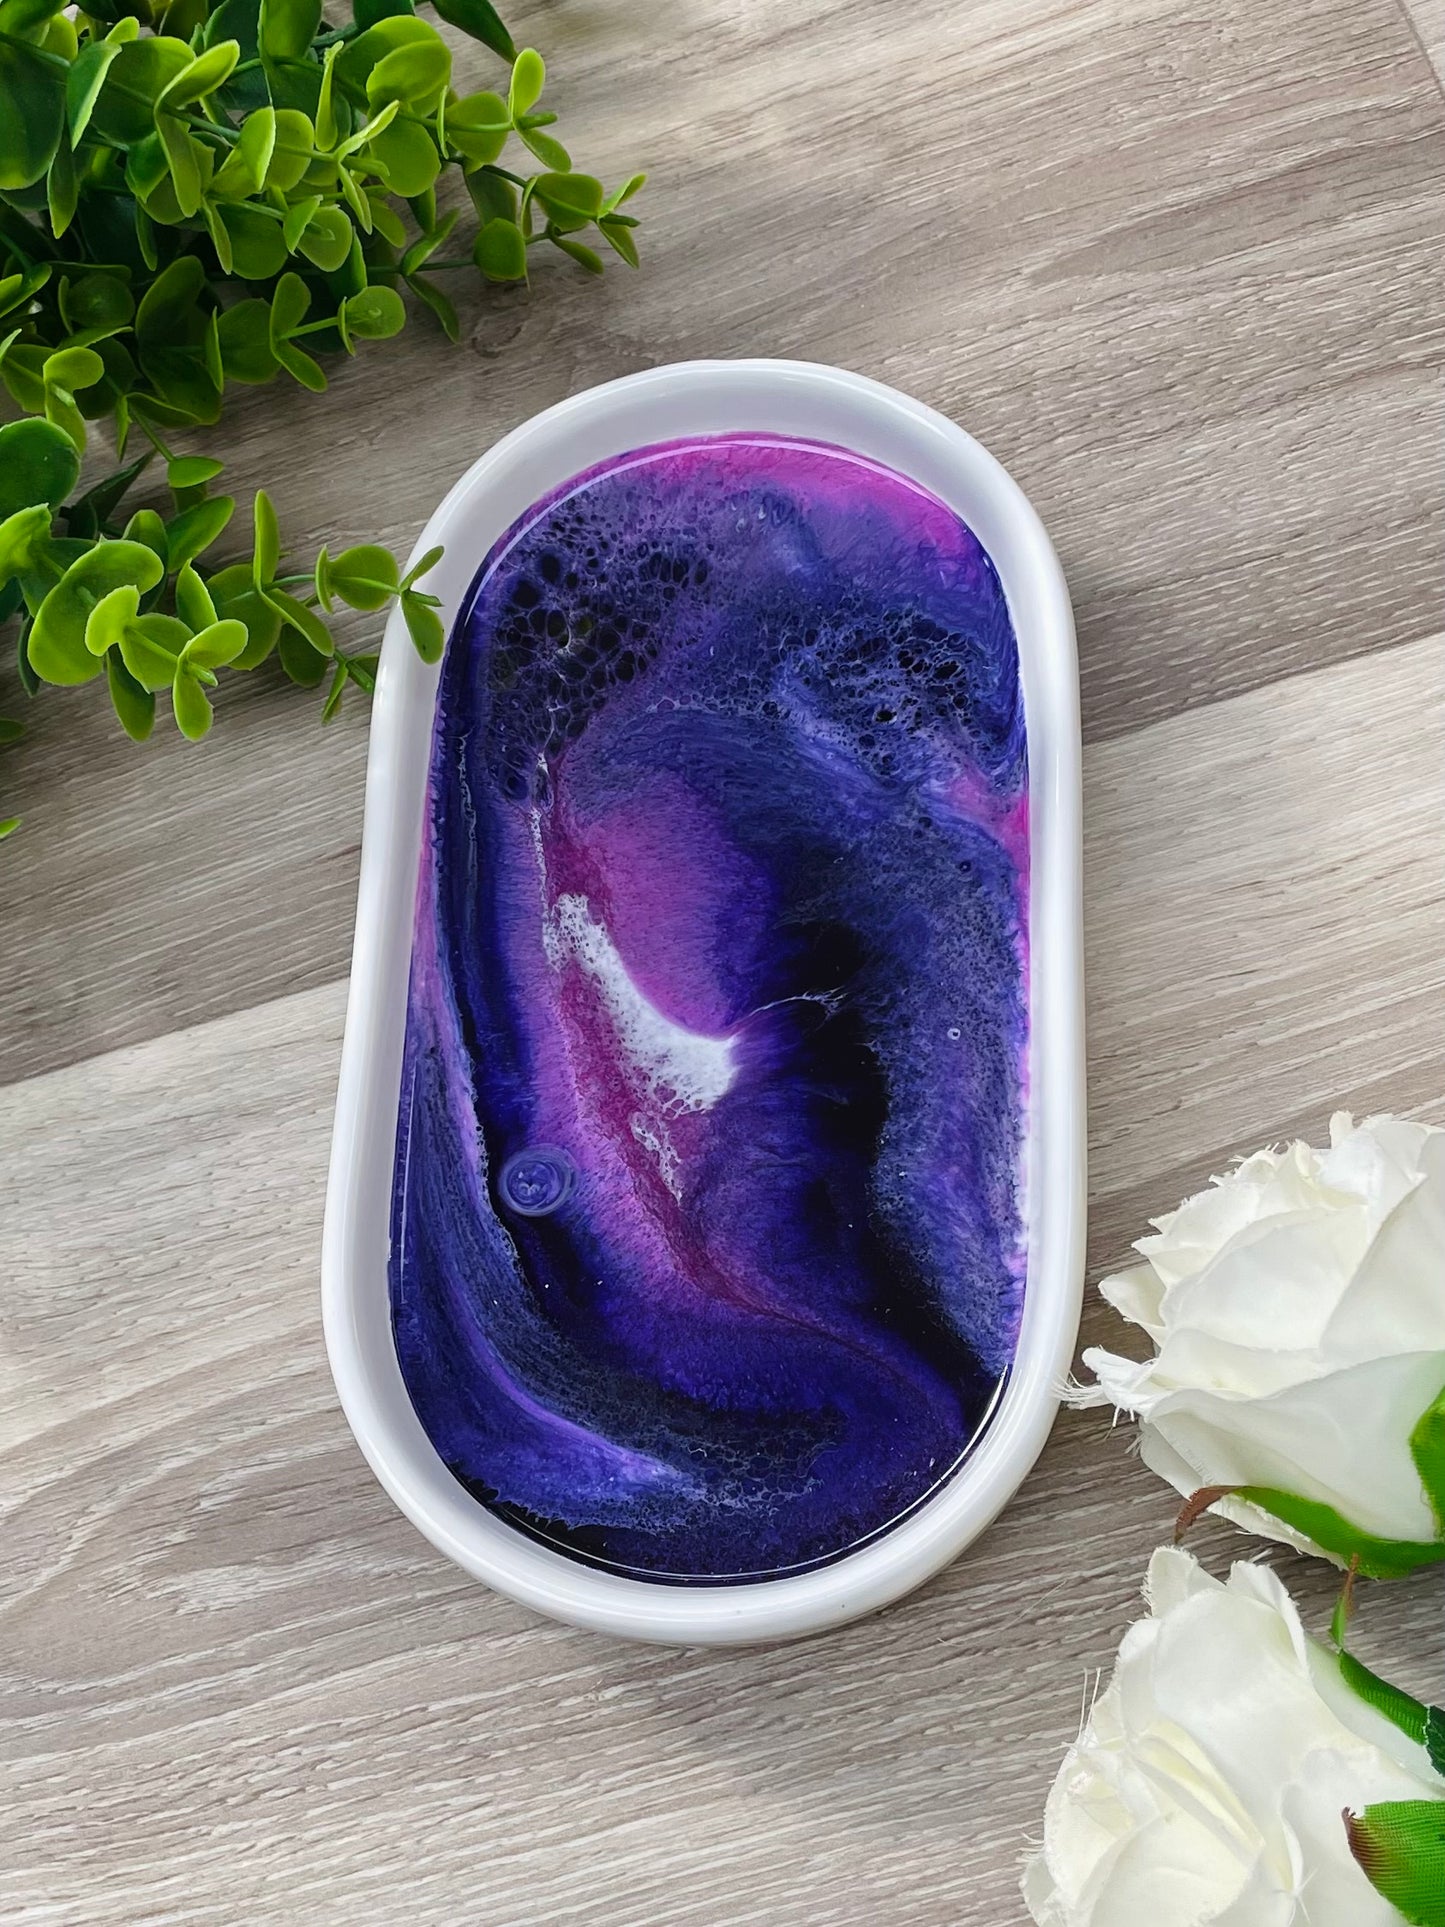 Oval Shaped Ceramic Trinket Tray  Gorgeous deep violet purple tones with pops of vivid purple & white 💜💫  Depending on the angle you look at the tray, you will always see something different!  Approx size 110mm x 200mm (11cm x 20cm)  This is a great size as a catchall for keys & pens or use as a décor item in the bathroom or living area. You can also use these on your vanity for perfume bottles, creams, sprays etc.  Last photo shows an example of use  Note: Some trays have minor factory imperfections